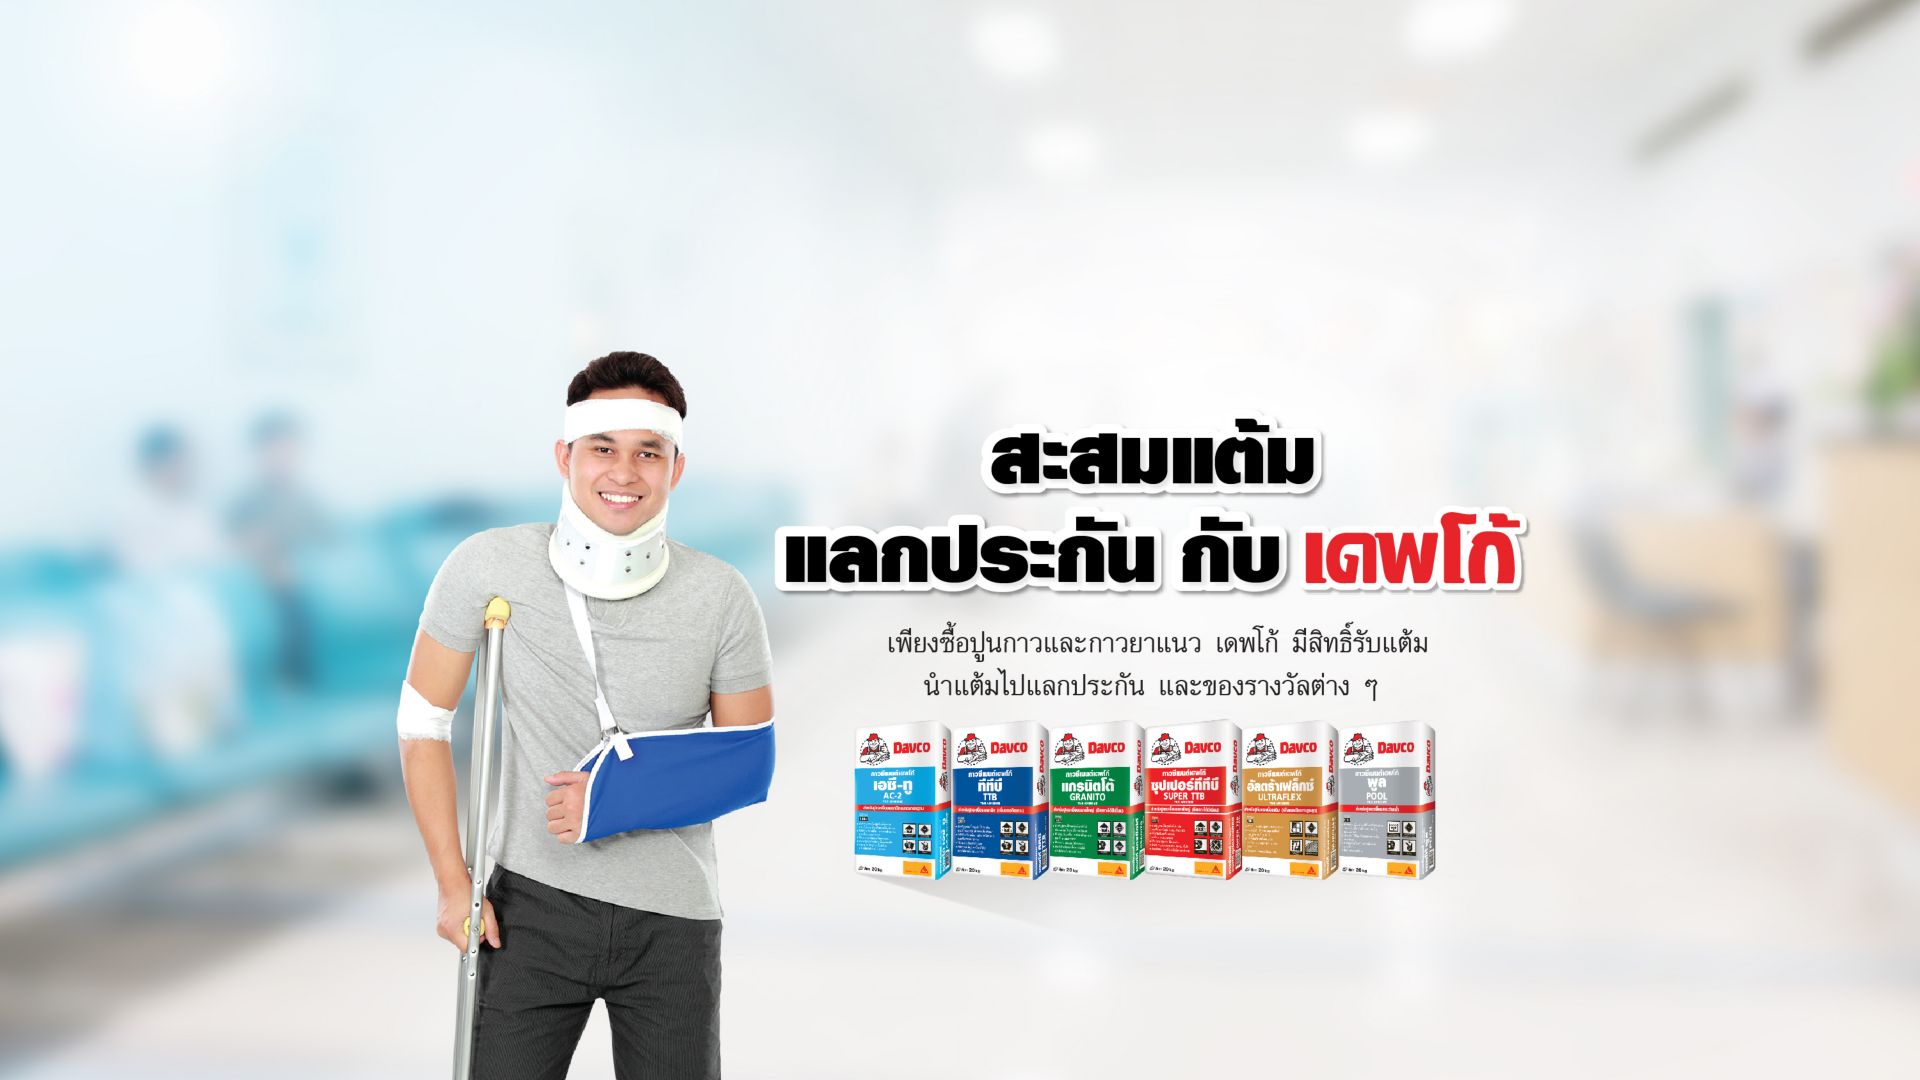 tile adhesive campaign